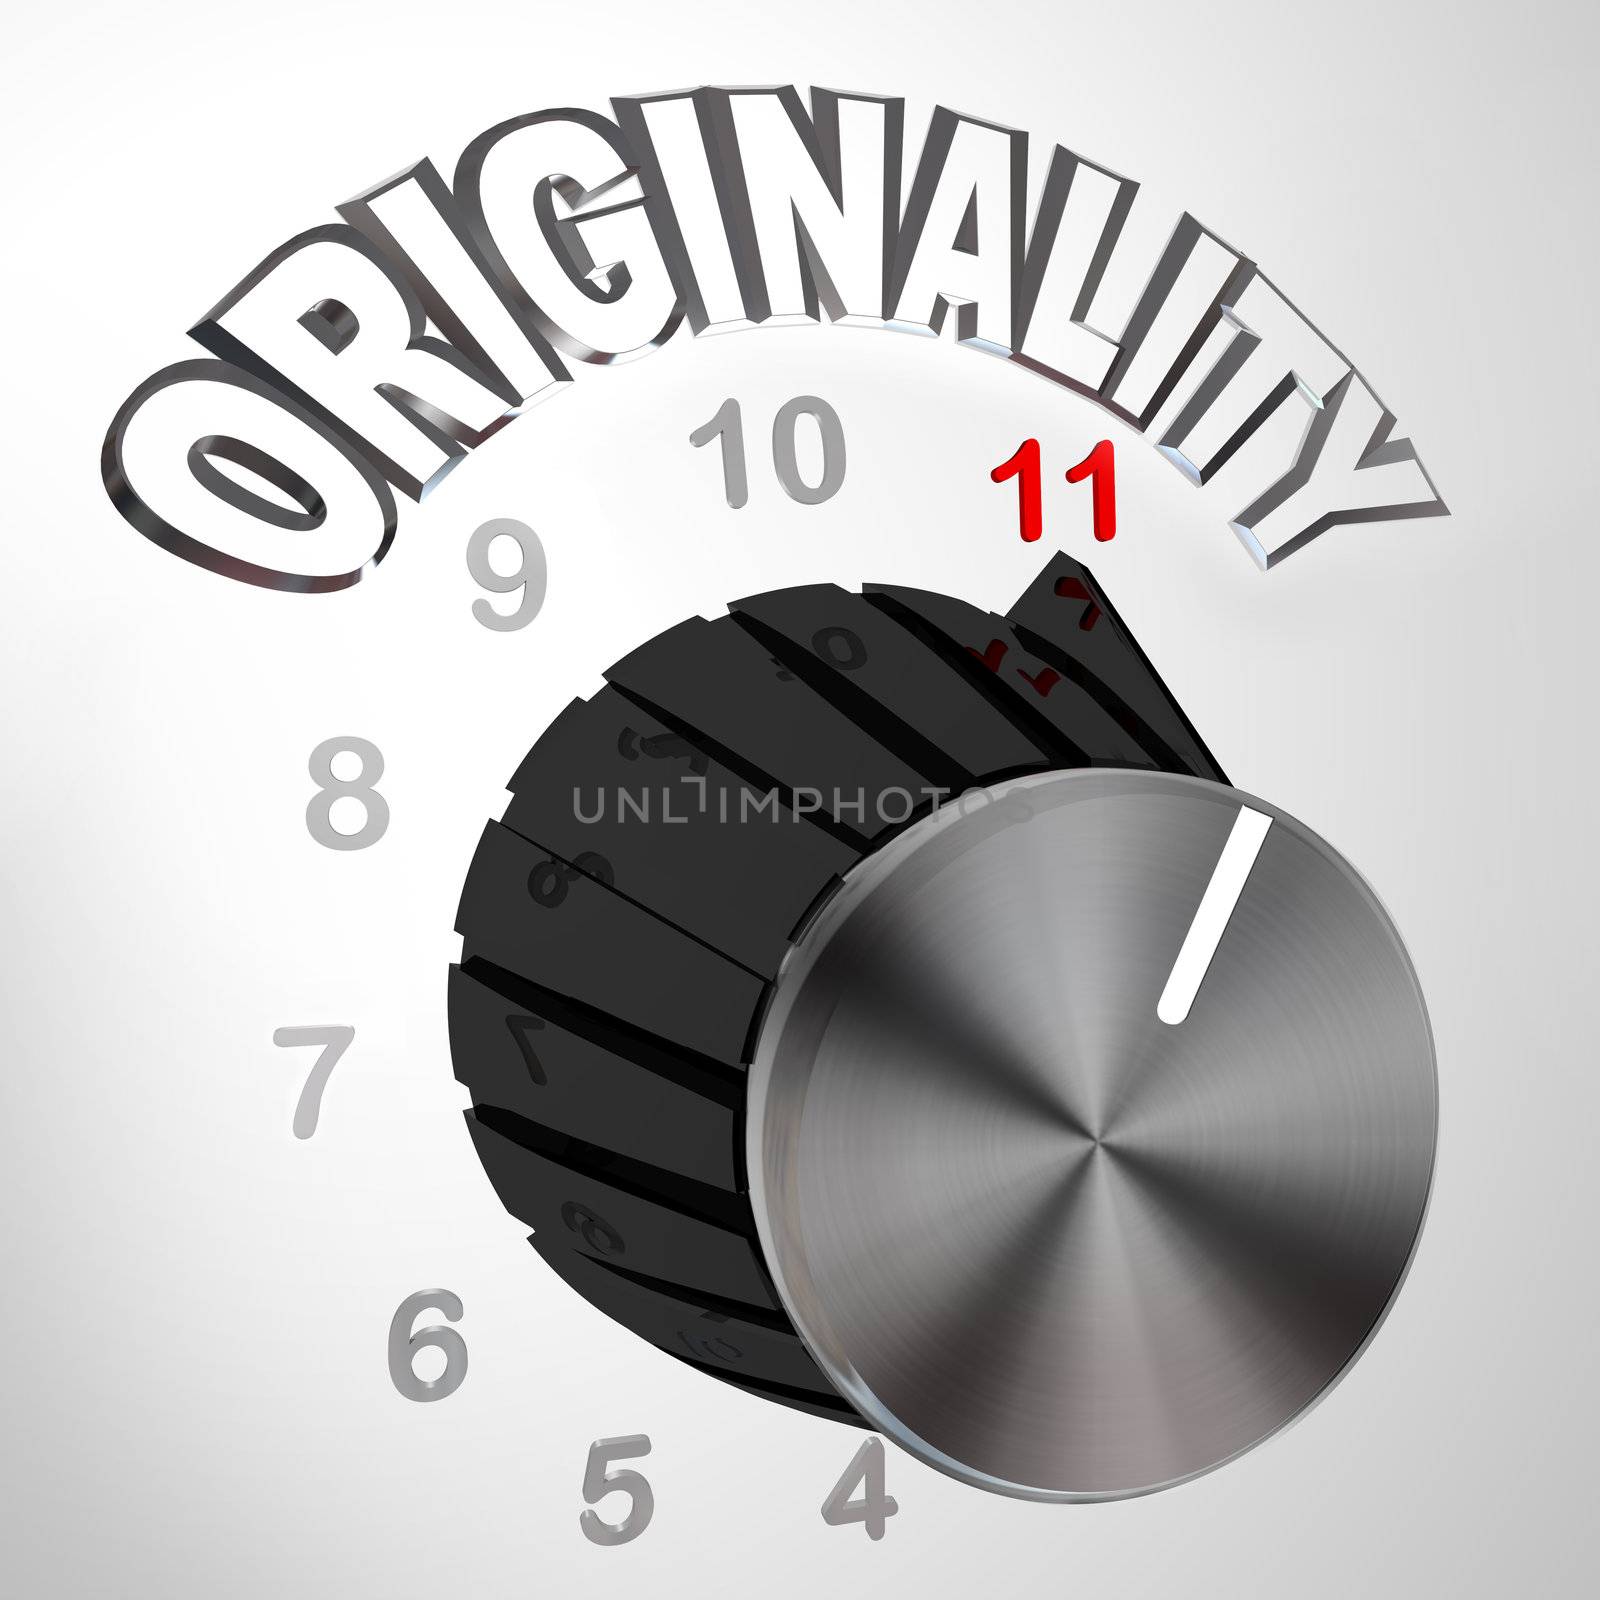 Originality Dial Knob Turned to Max - Innovative Invention by iQoncept